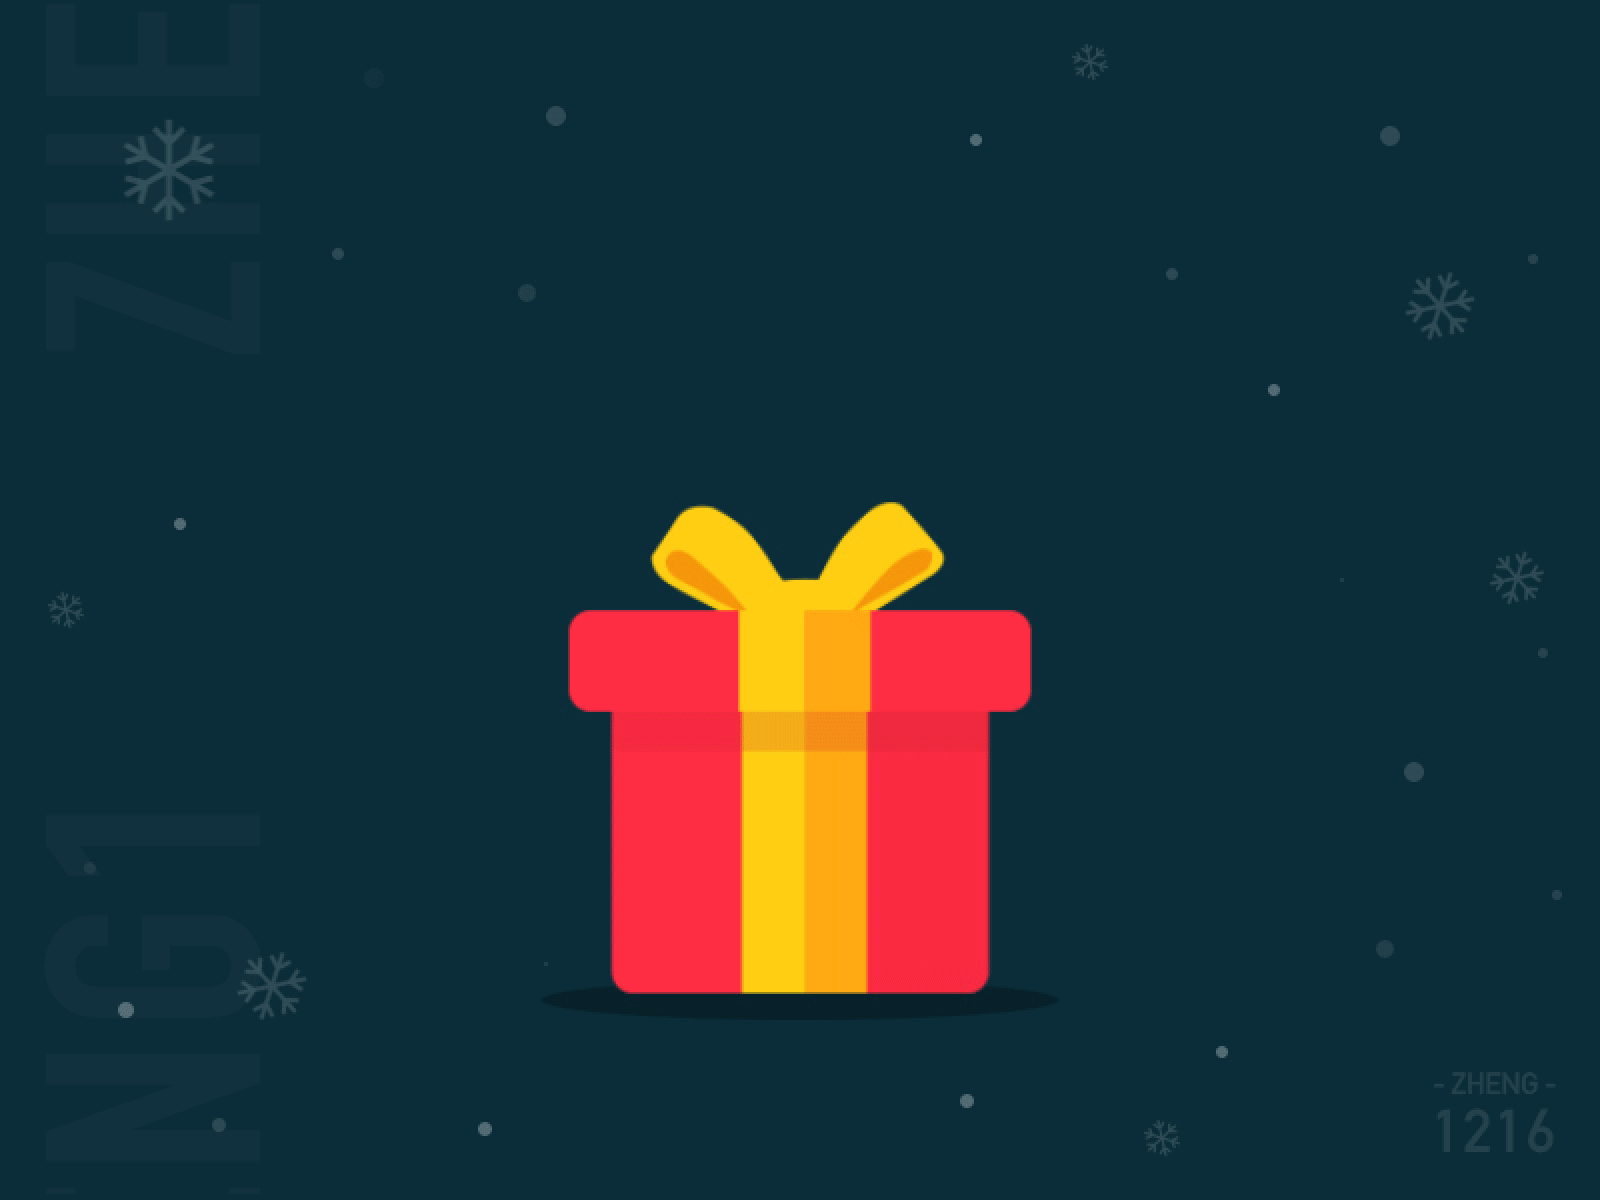 Christmas gifts🎁 by ZHENG1 on Dribbble